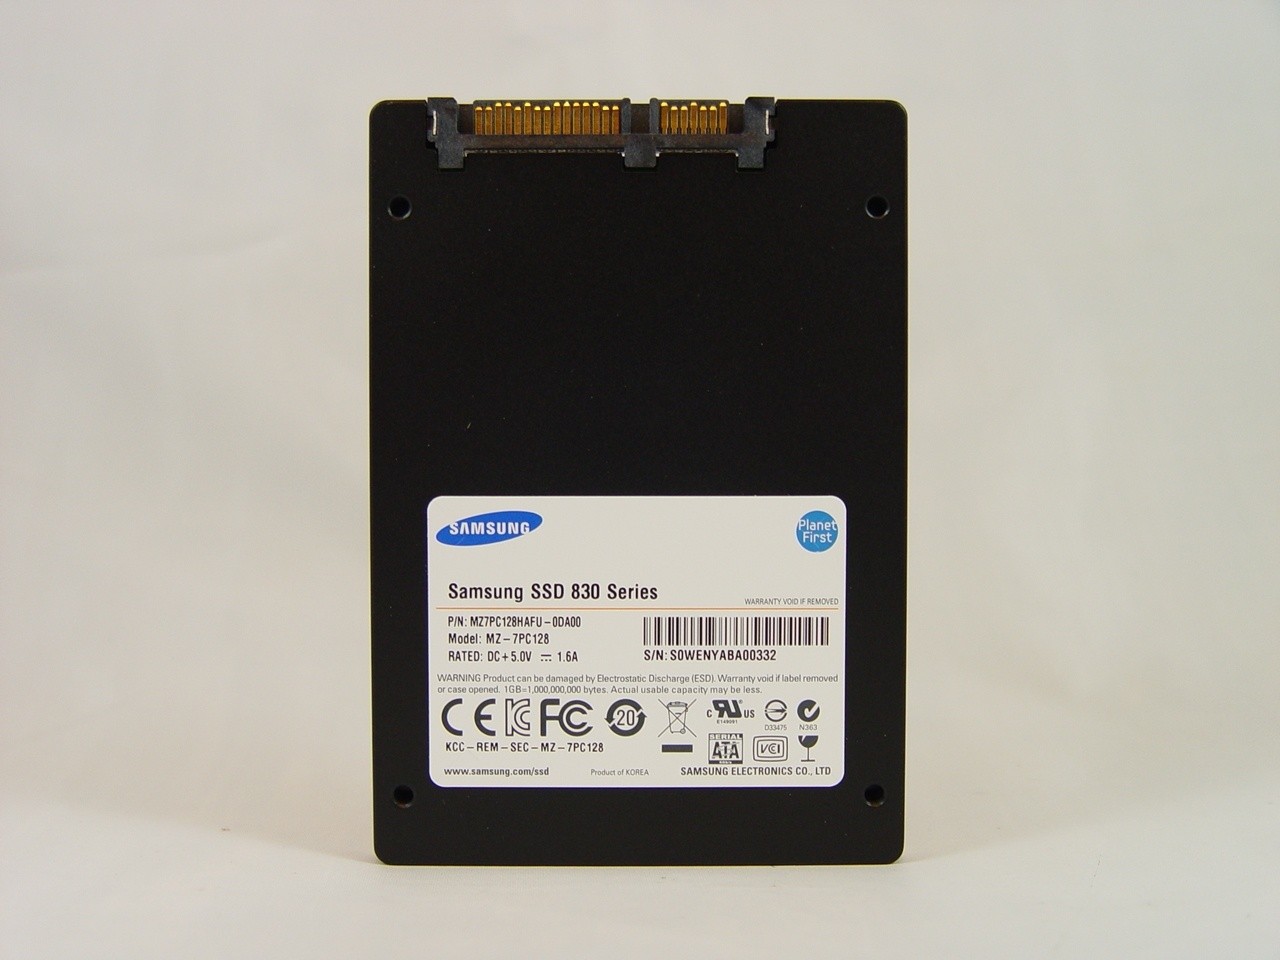 telex Lang Implement Samsung 830 Series 128GB Solid State Drive Review